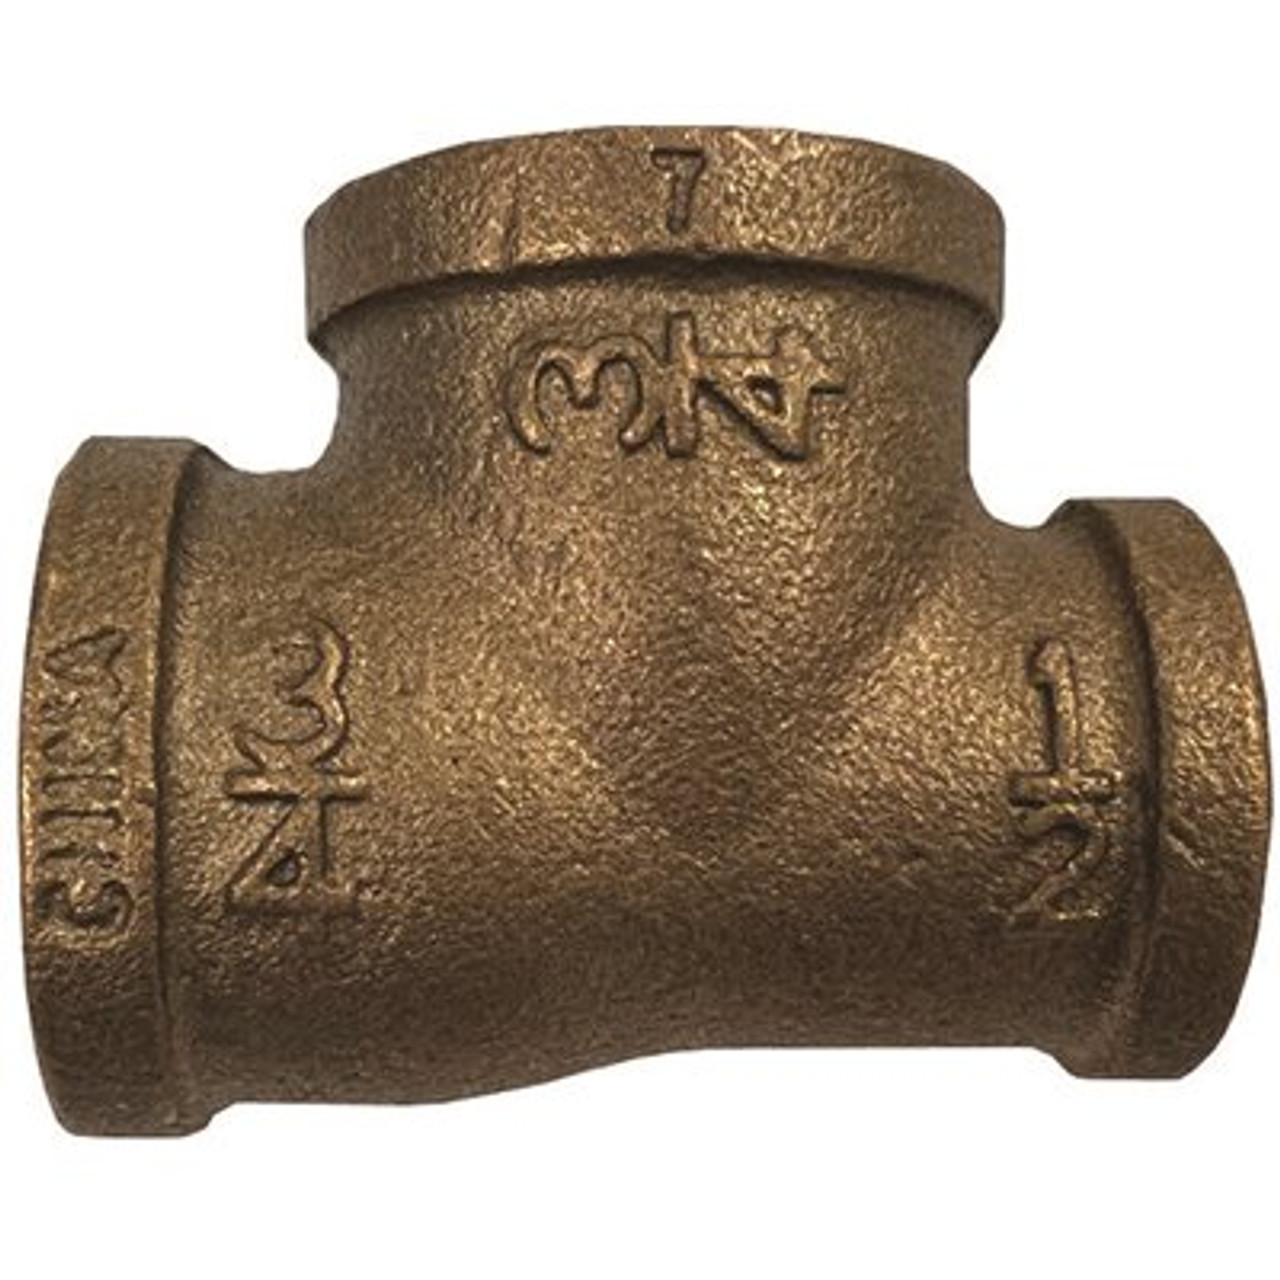 Matco-Norca 3/4 In. X 1/2 In. X 3/4 In. Lead Free Brass Reducing Tee Fitting